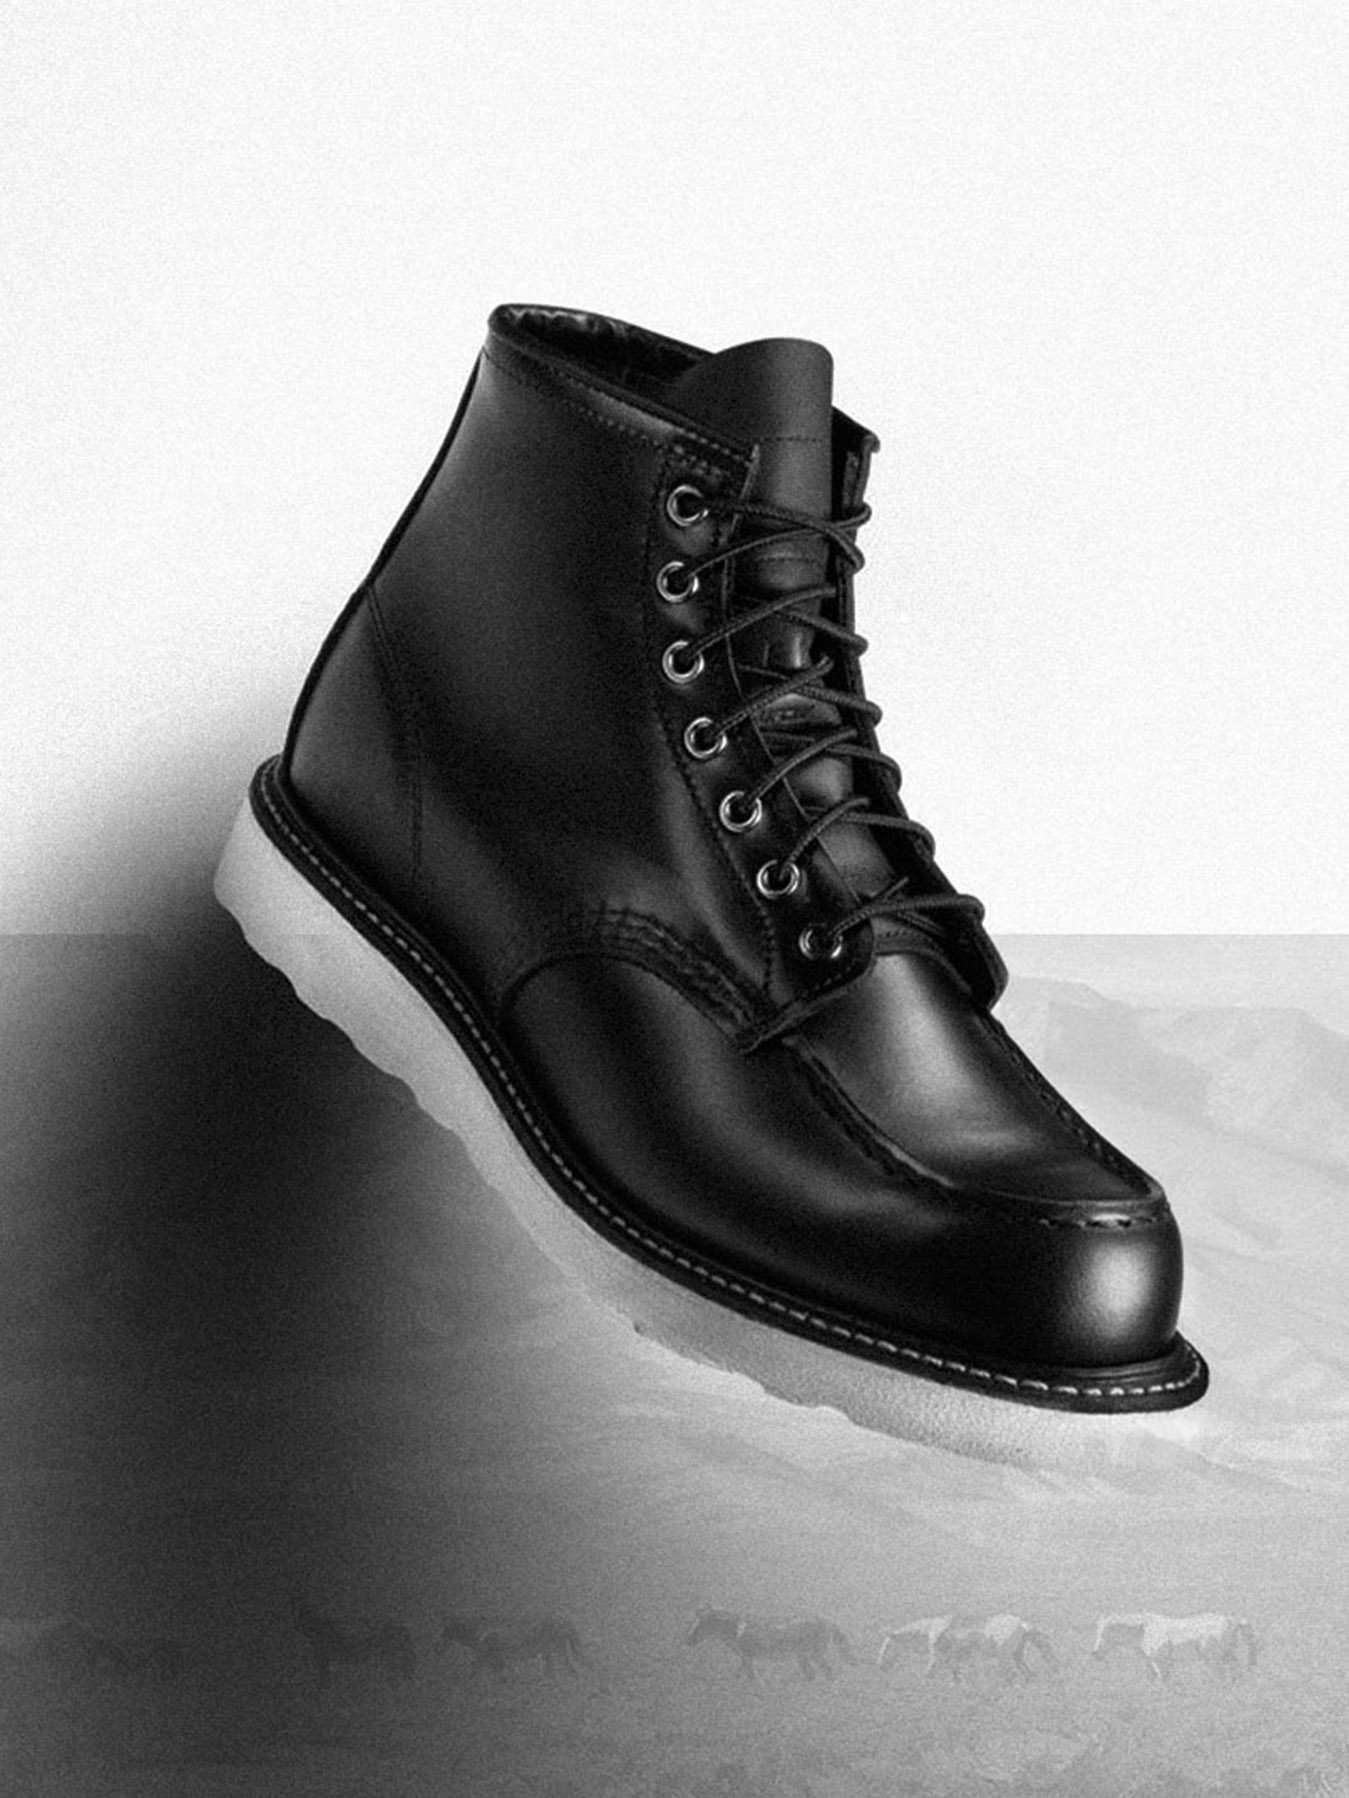 The Iconic American Boots : Red Wing